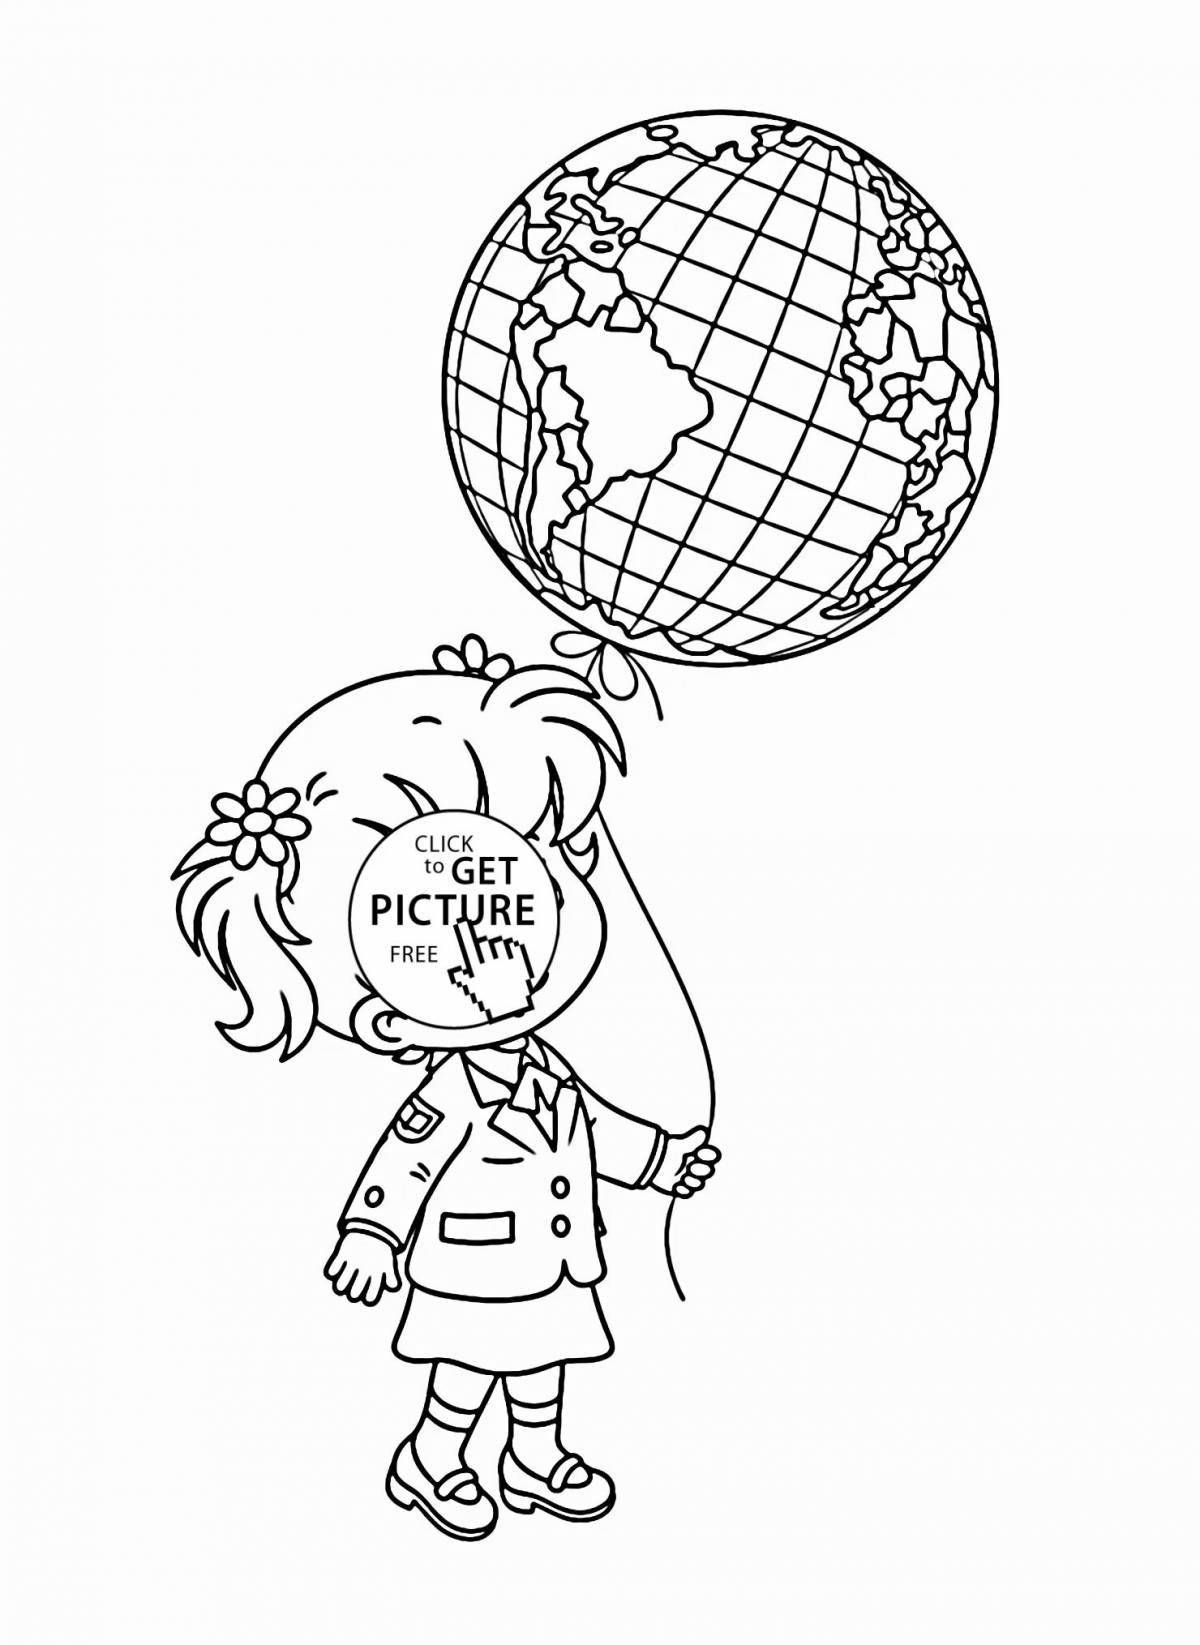 Coloring template bright globe for kids